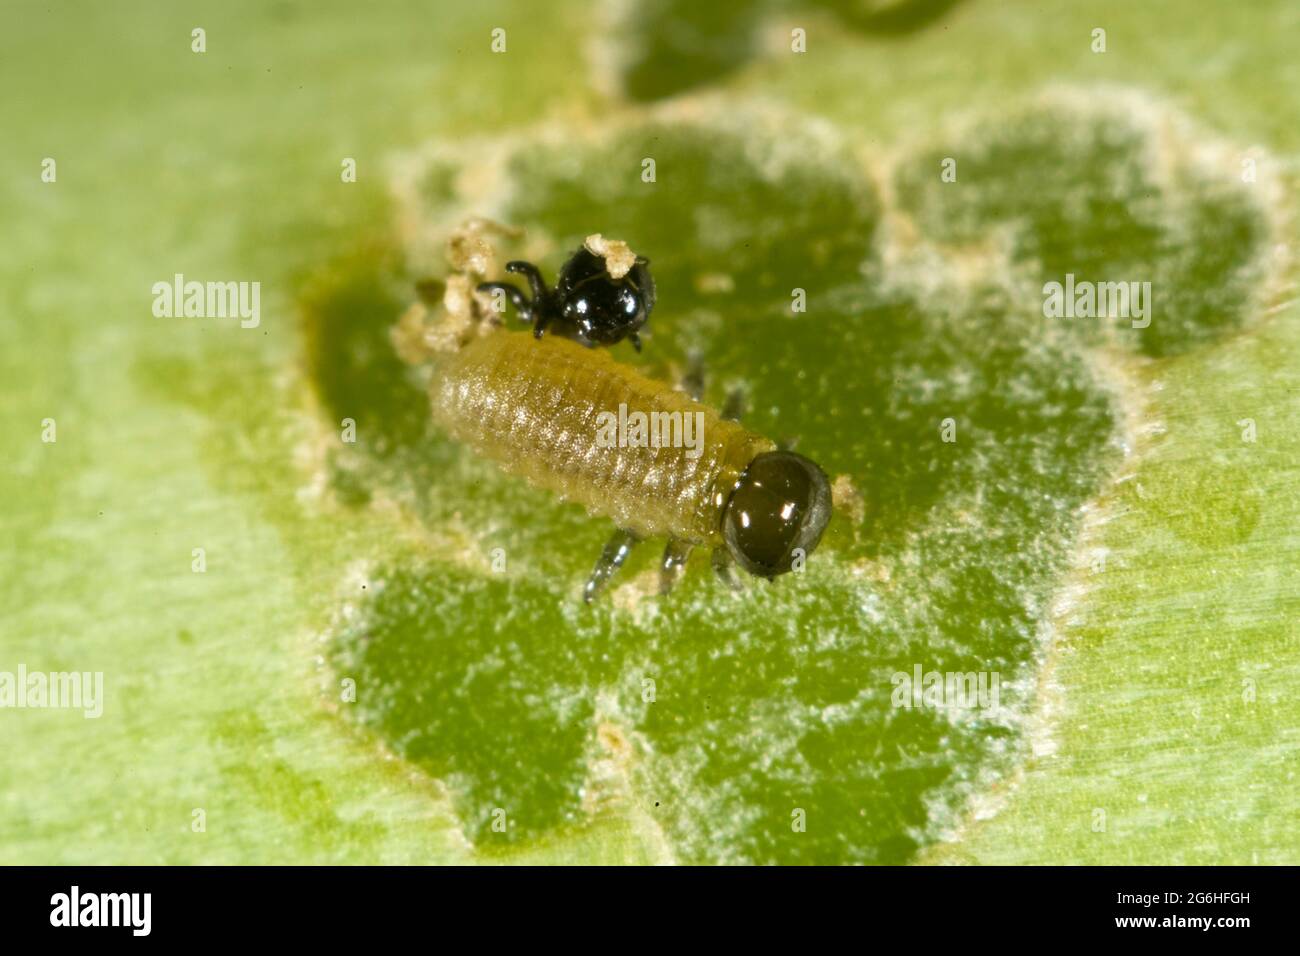 Asparagus beetle (Crioceris asparagi) young larva and some damage to newly emerged asparagus spears, Berkshire, June Stock Photo